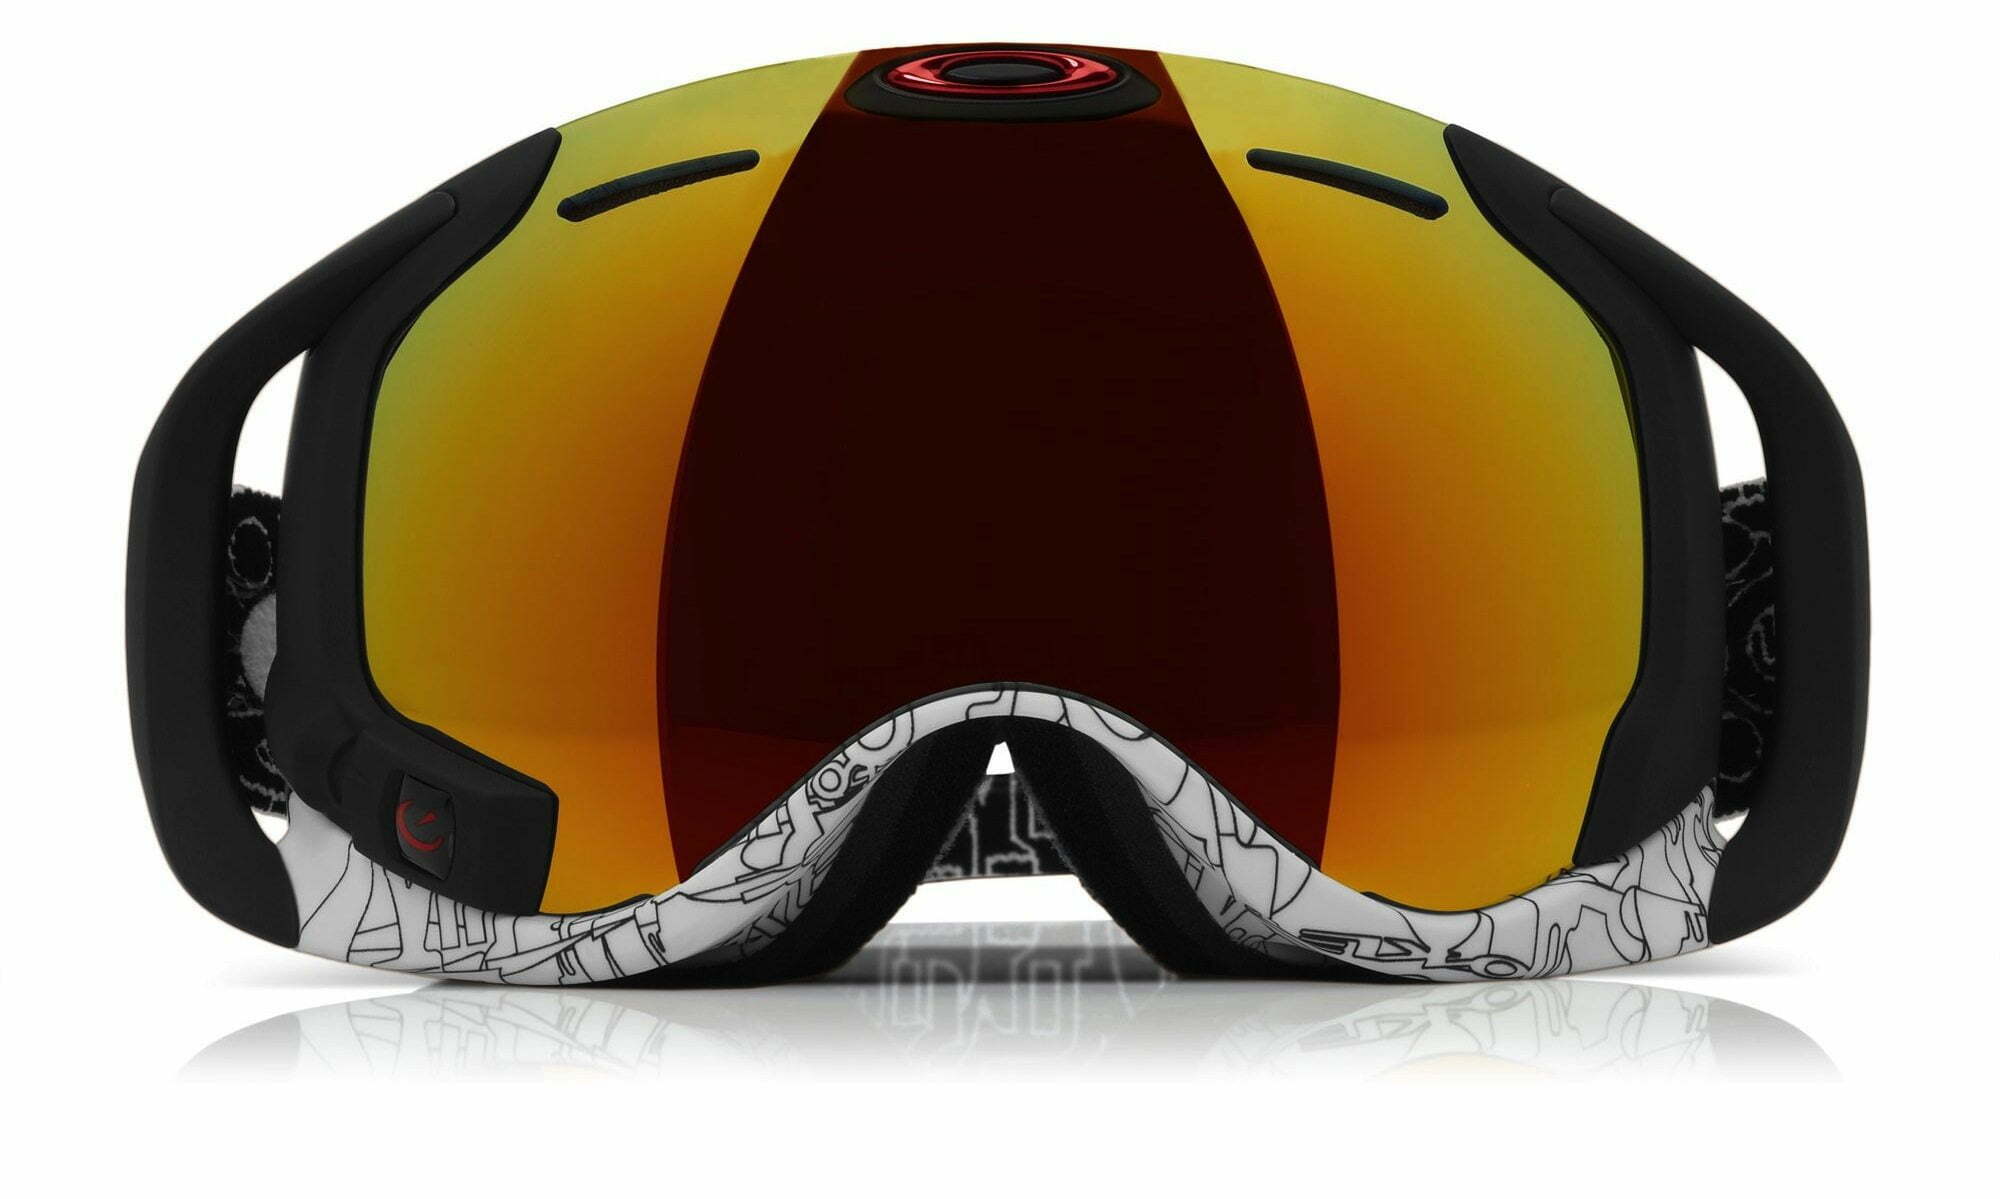 Oakley Airwave Ski Goggles With Built-in HUD Instantly Display Speed,  Friends, And More - Gadget Review